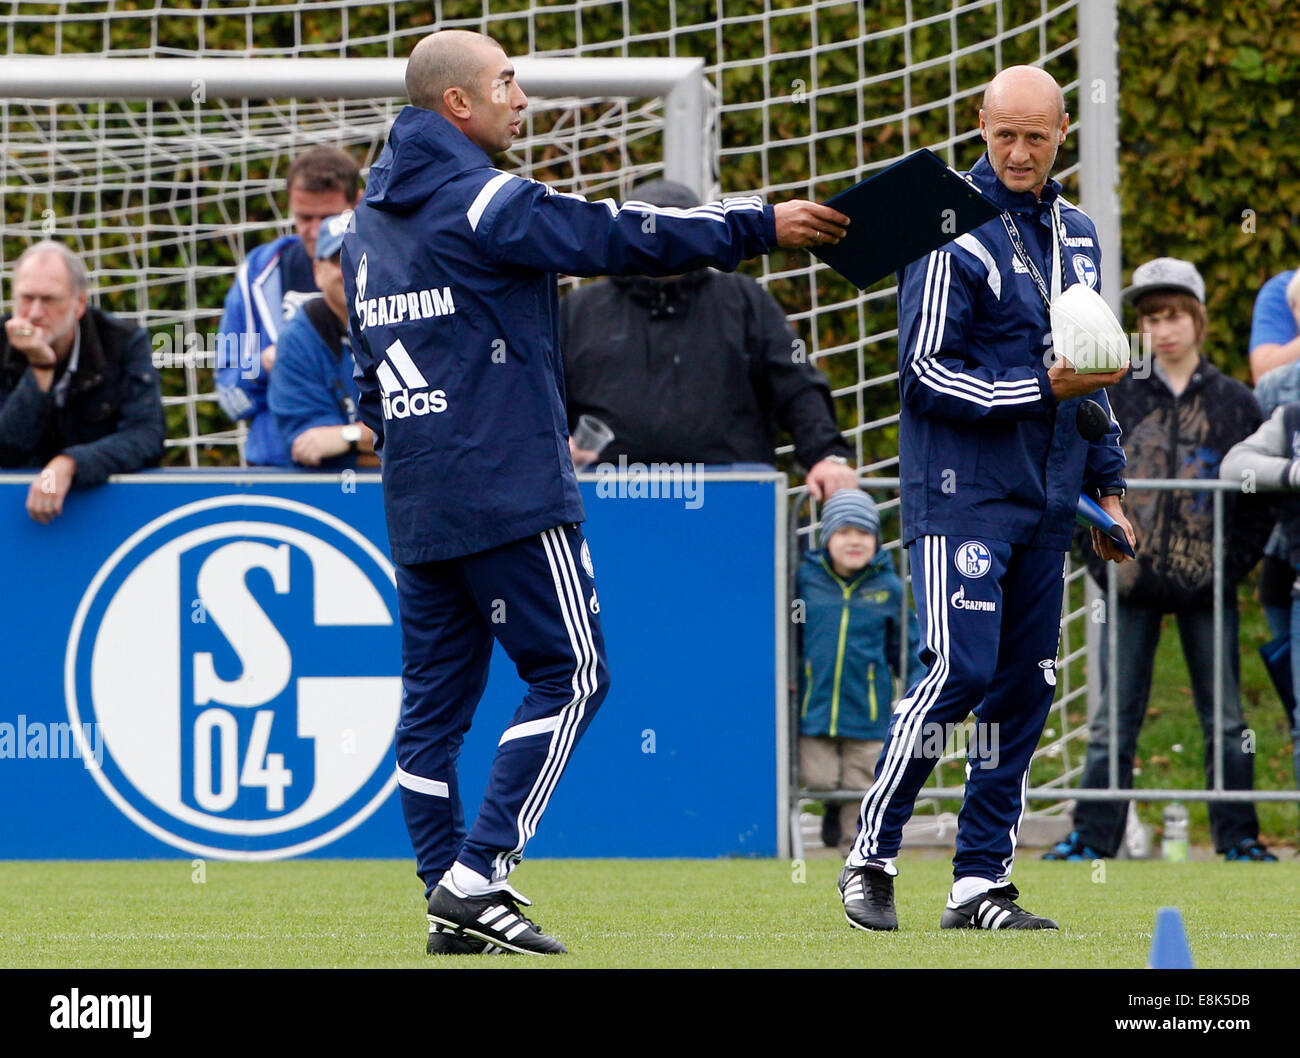 Geselnkirchen, Germany. 9th Oct, 2014. The new headcoach of German Bundesliga soccer club Schalke 04, Roberto di Matteo, leads his first training session with assistant coach Attilio Lombardo in Geselnkirchen, Germany, 09 October 2014. Matteo takes over from Jens Keller. Photo: Roland Weihrauch/dpa/Alamy Live News Stock Photo